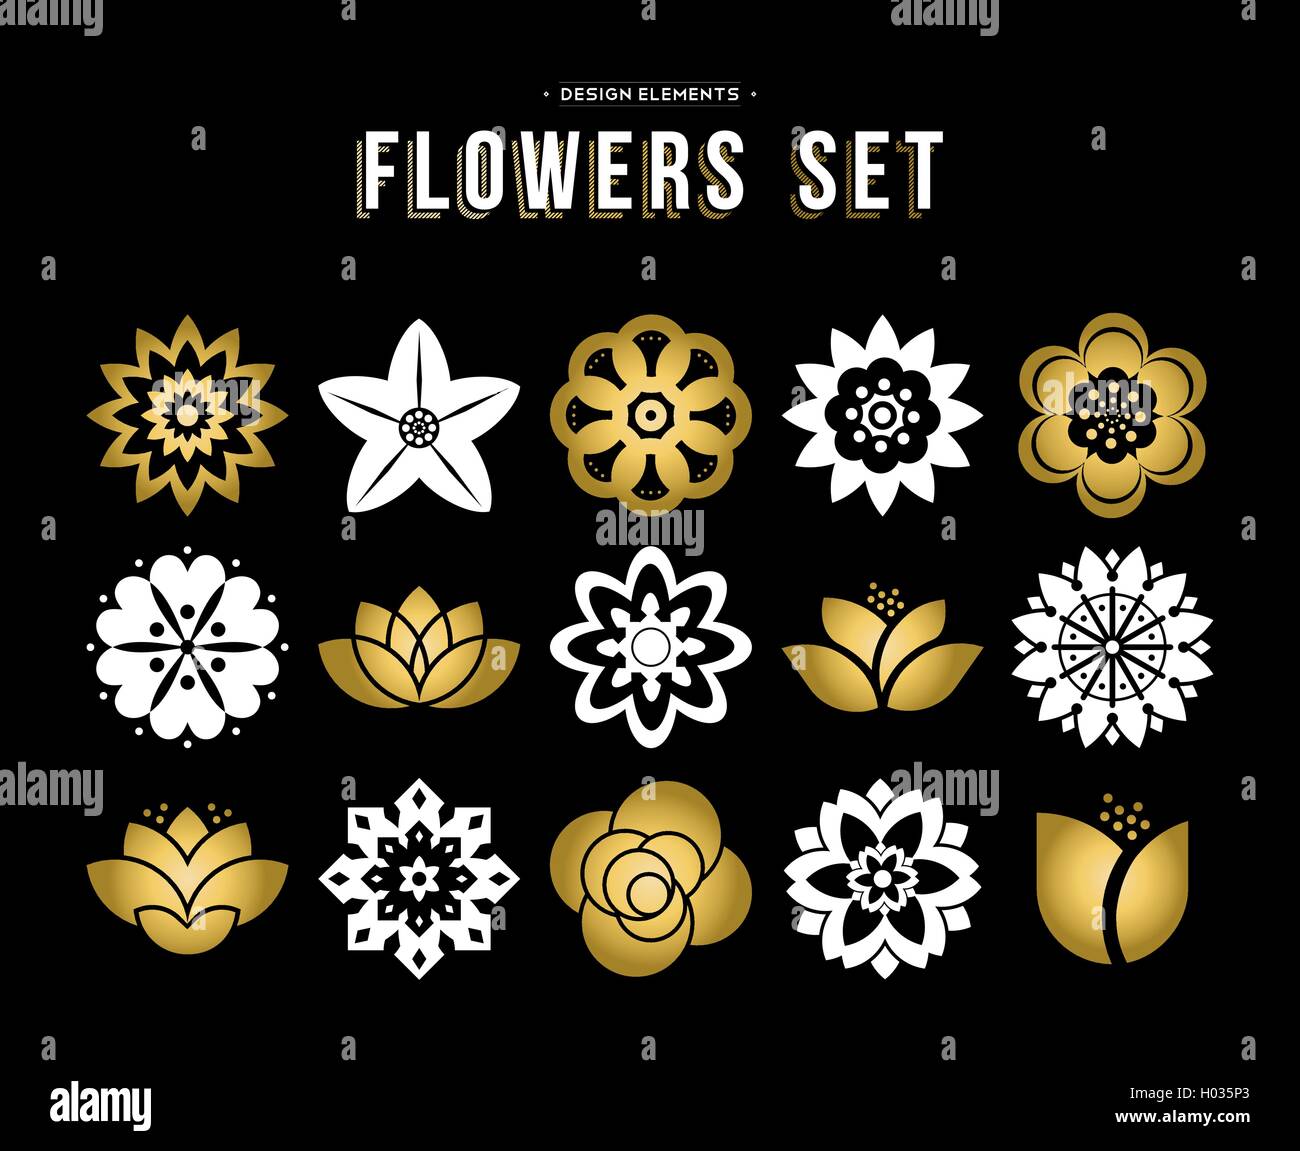 Gold color set of flowers icons in modern flat art illustration style. Floral nature icons lotus, lily and rose. EPS10 vector. Stock Vector